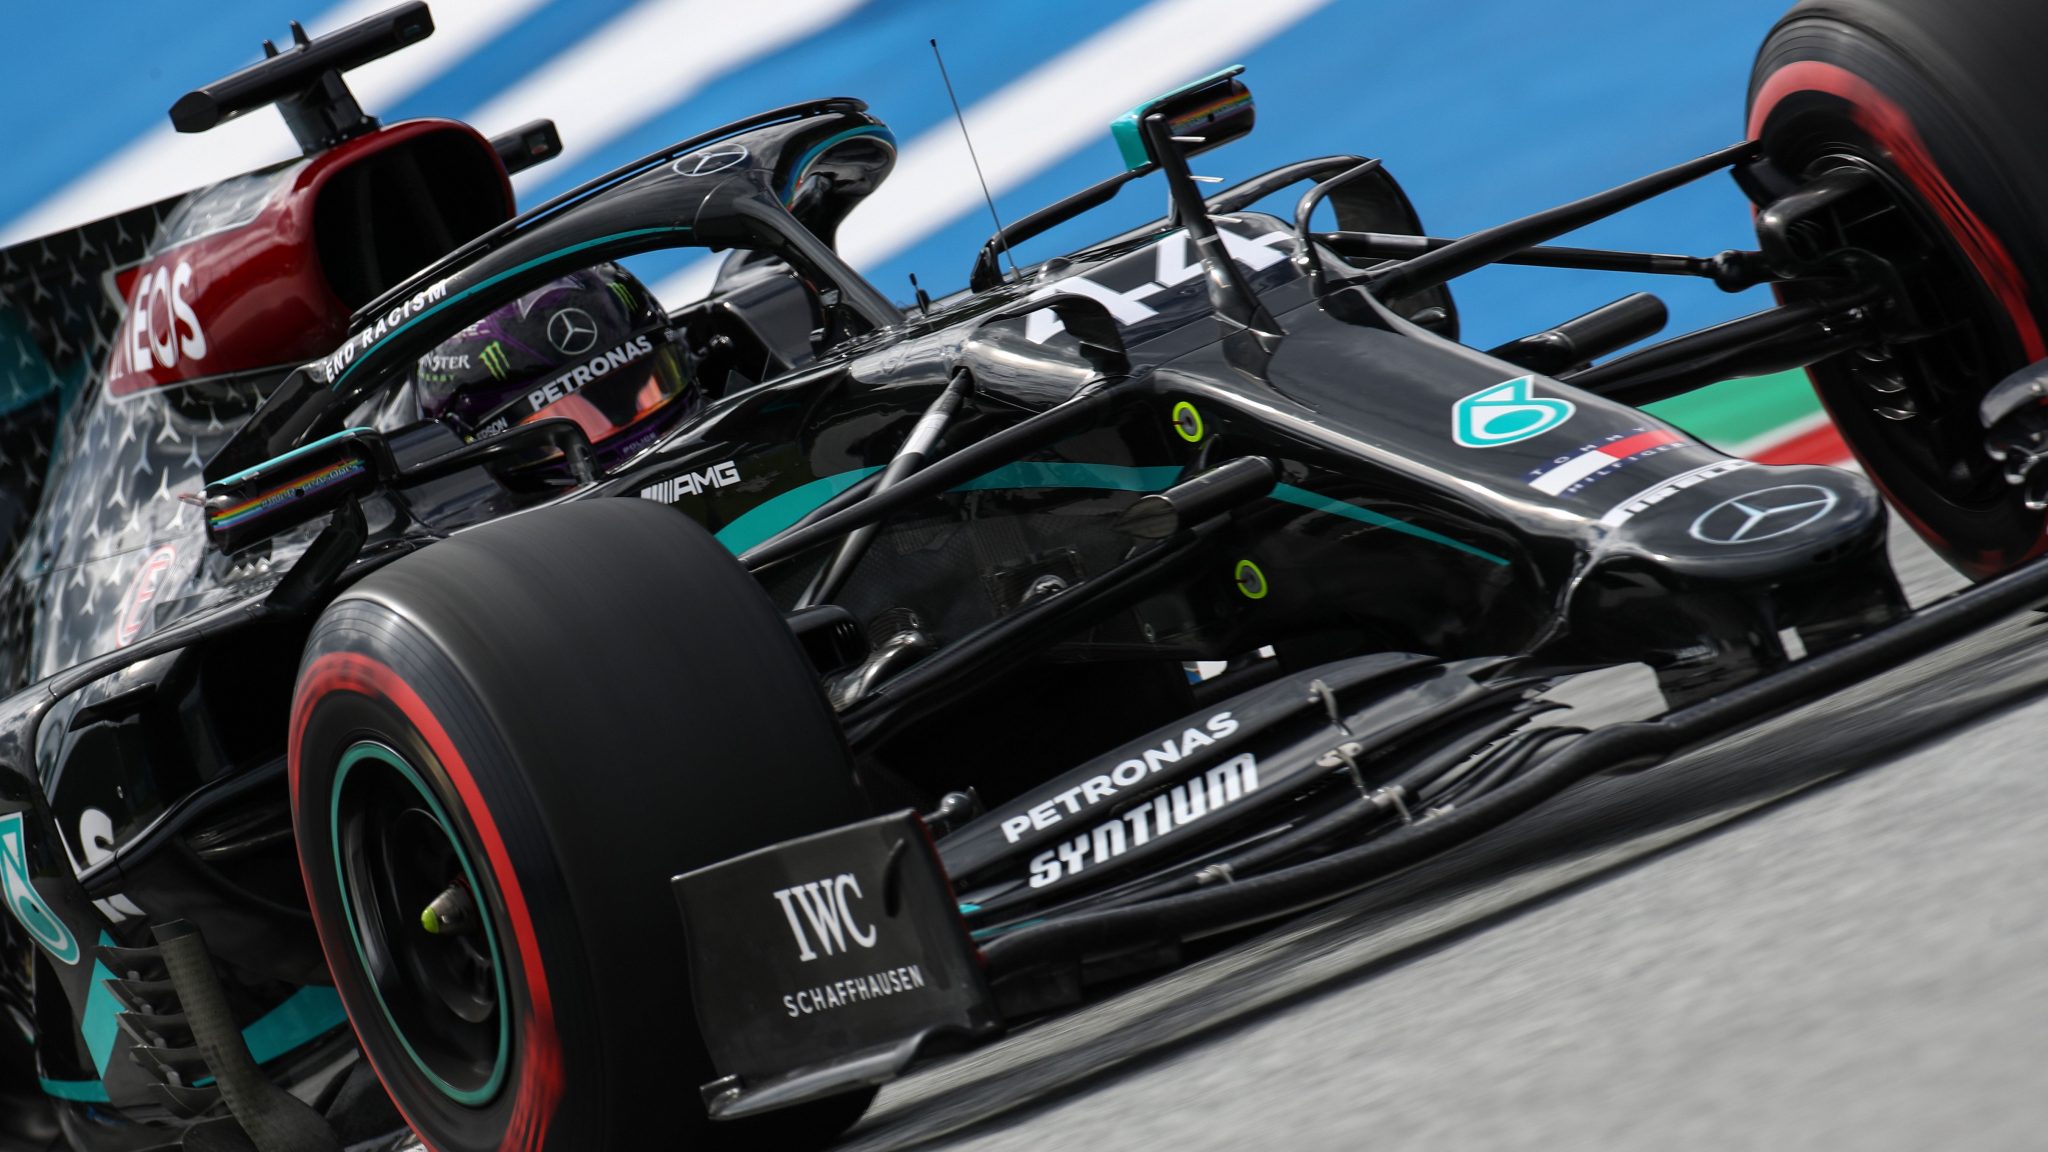 F1 live stream 2020 how to watch every Grand Prix online from anywhere